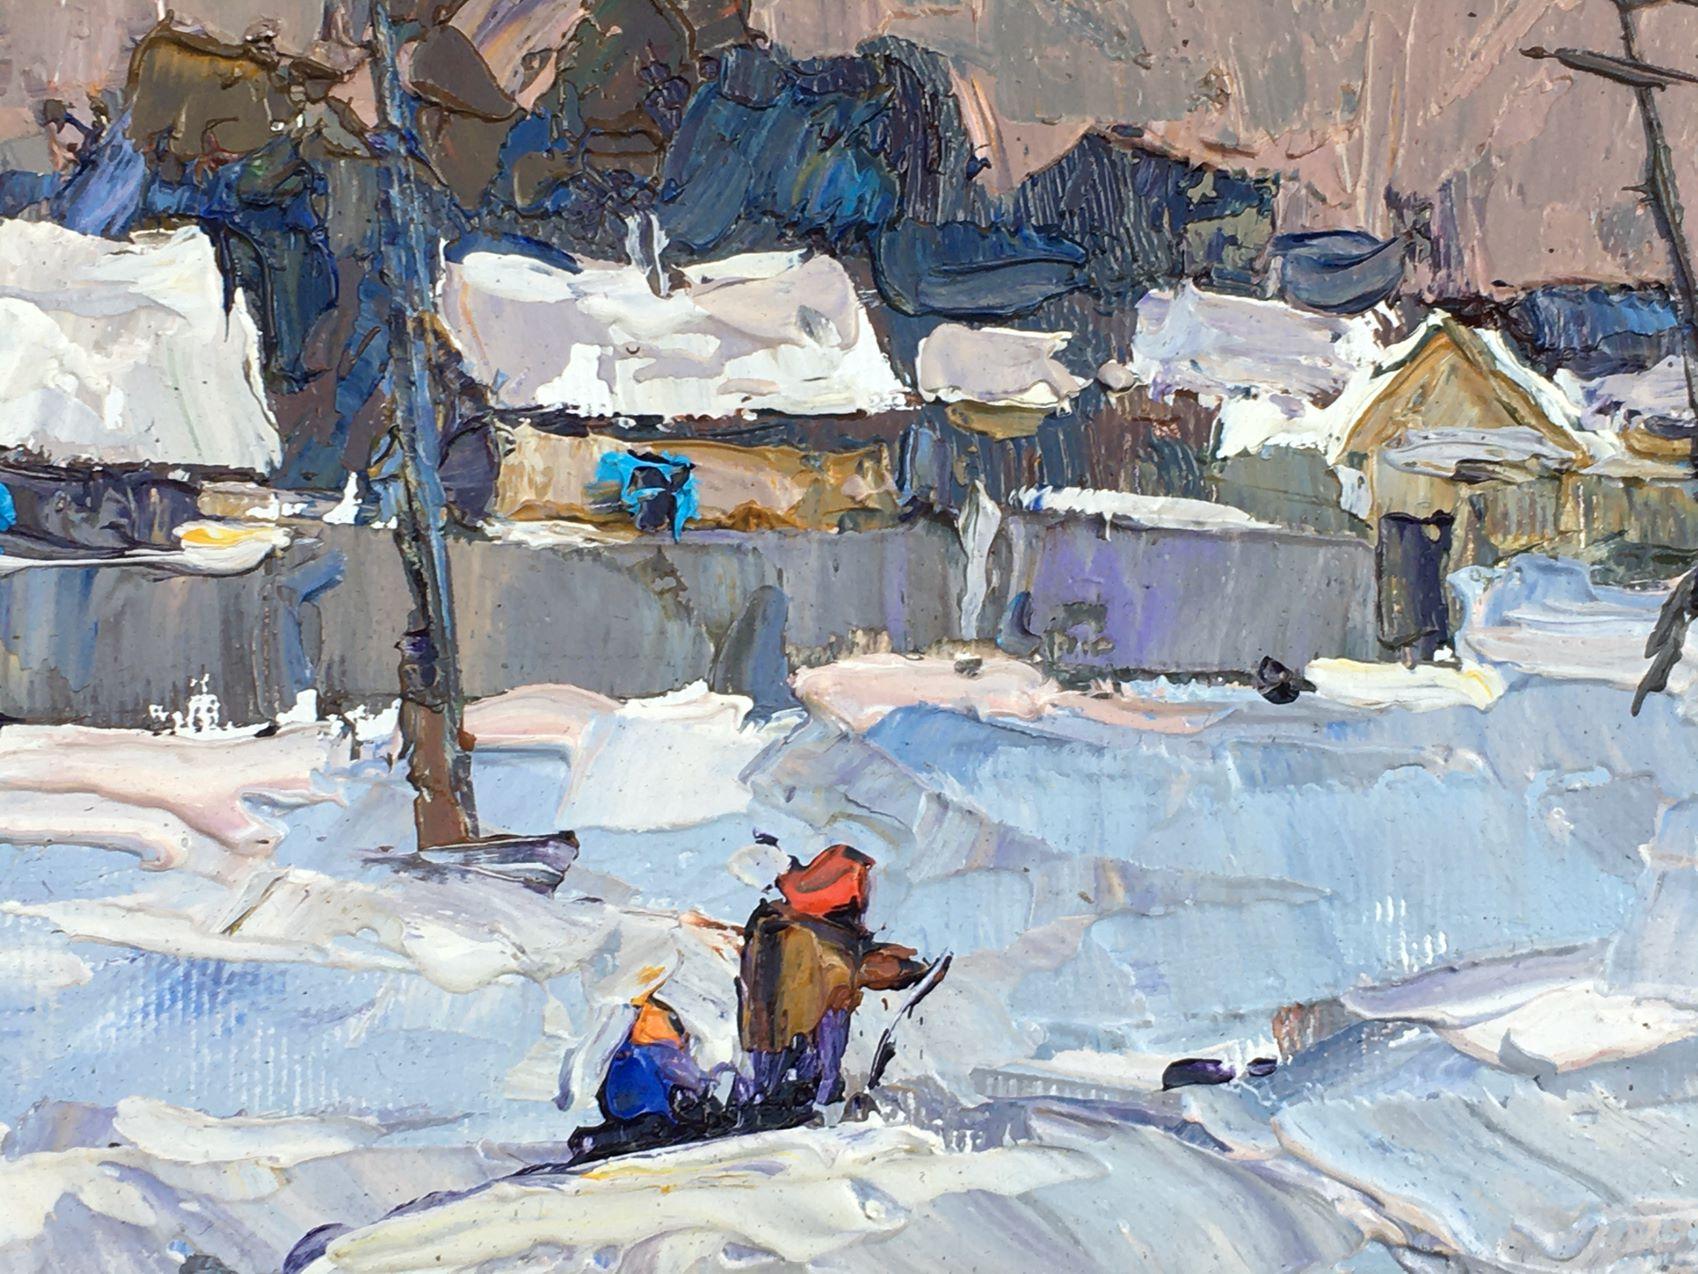 Street in the Snow, Village, Original oil Painting, Ready to Hang - Gray Landscape Painting by Alex Kalenyuk  